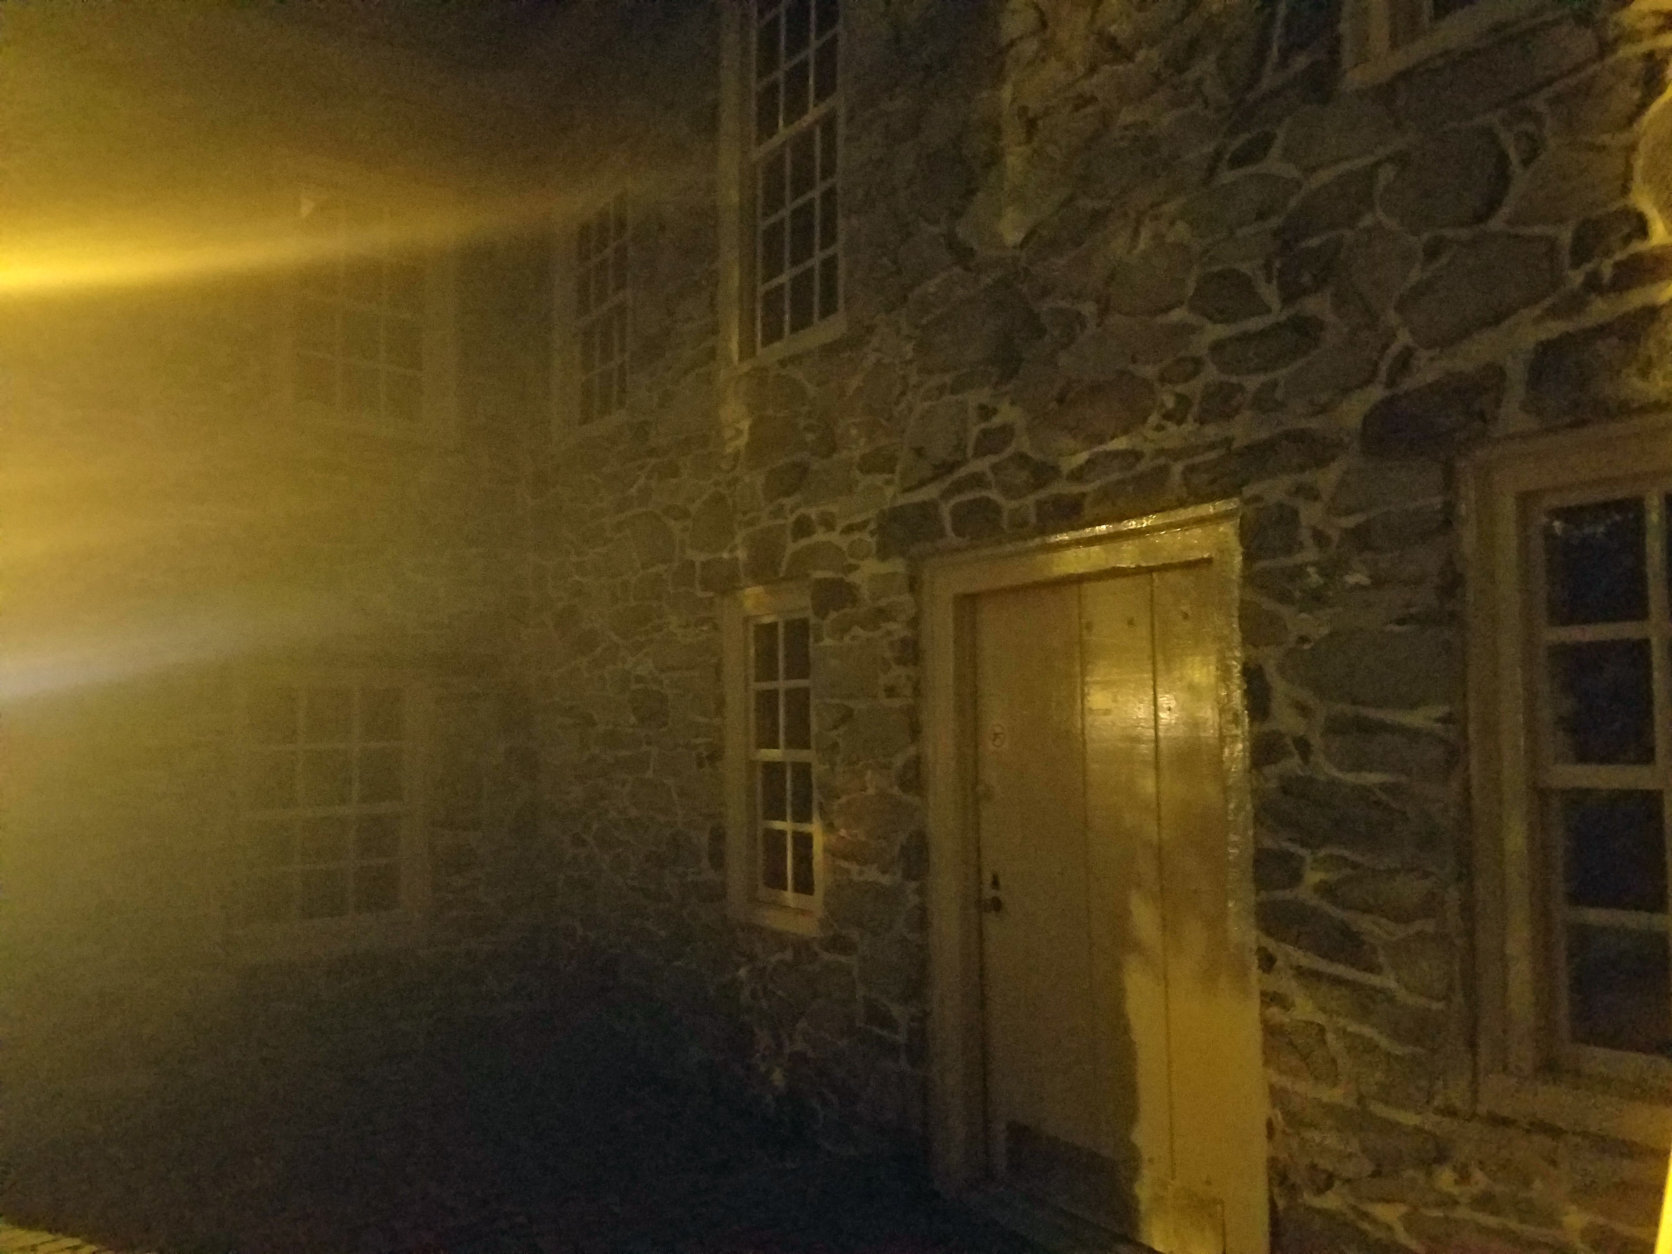 The Old Stone House at night is not a welcoming sight. (WTOP/Will VItka)